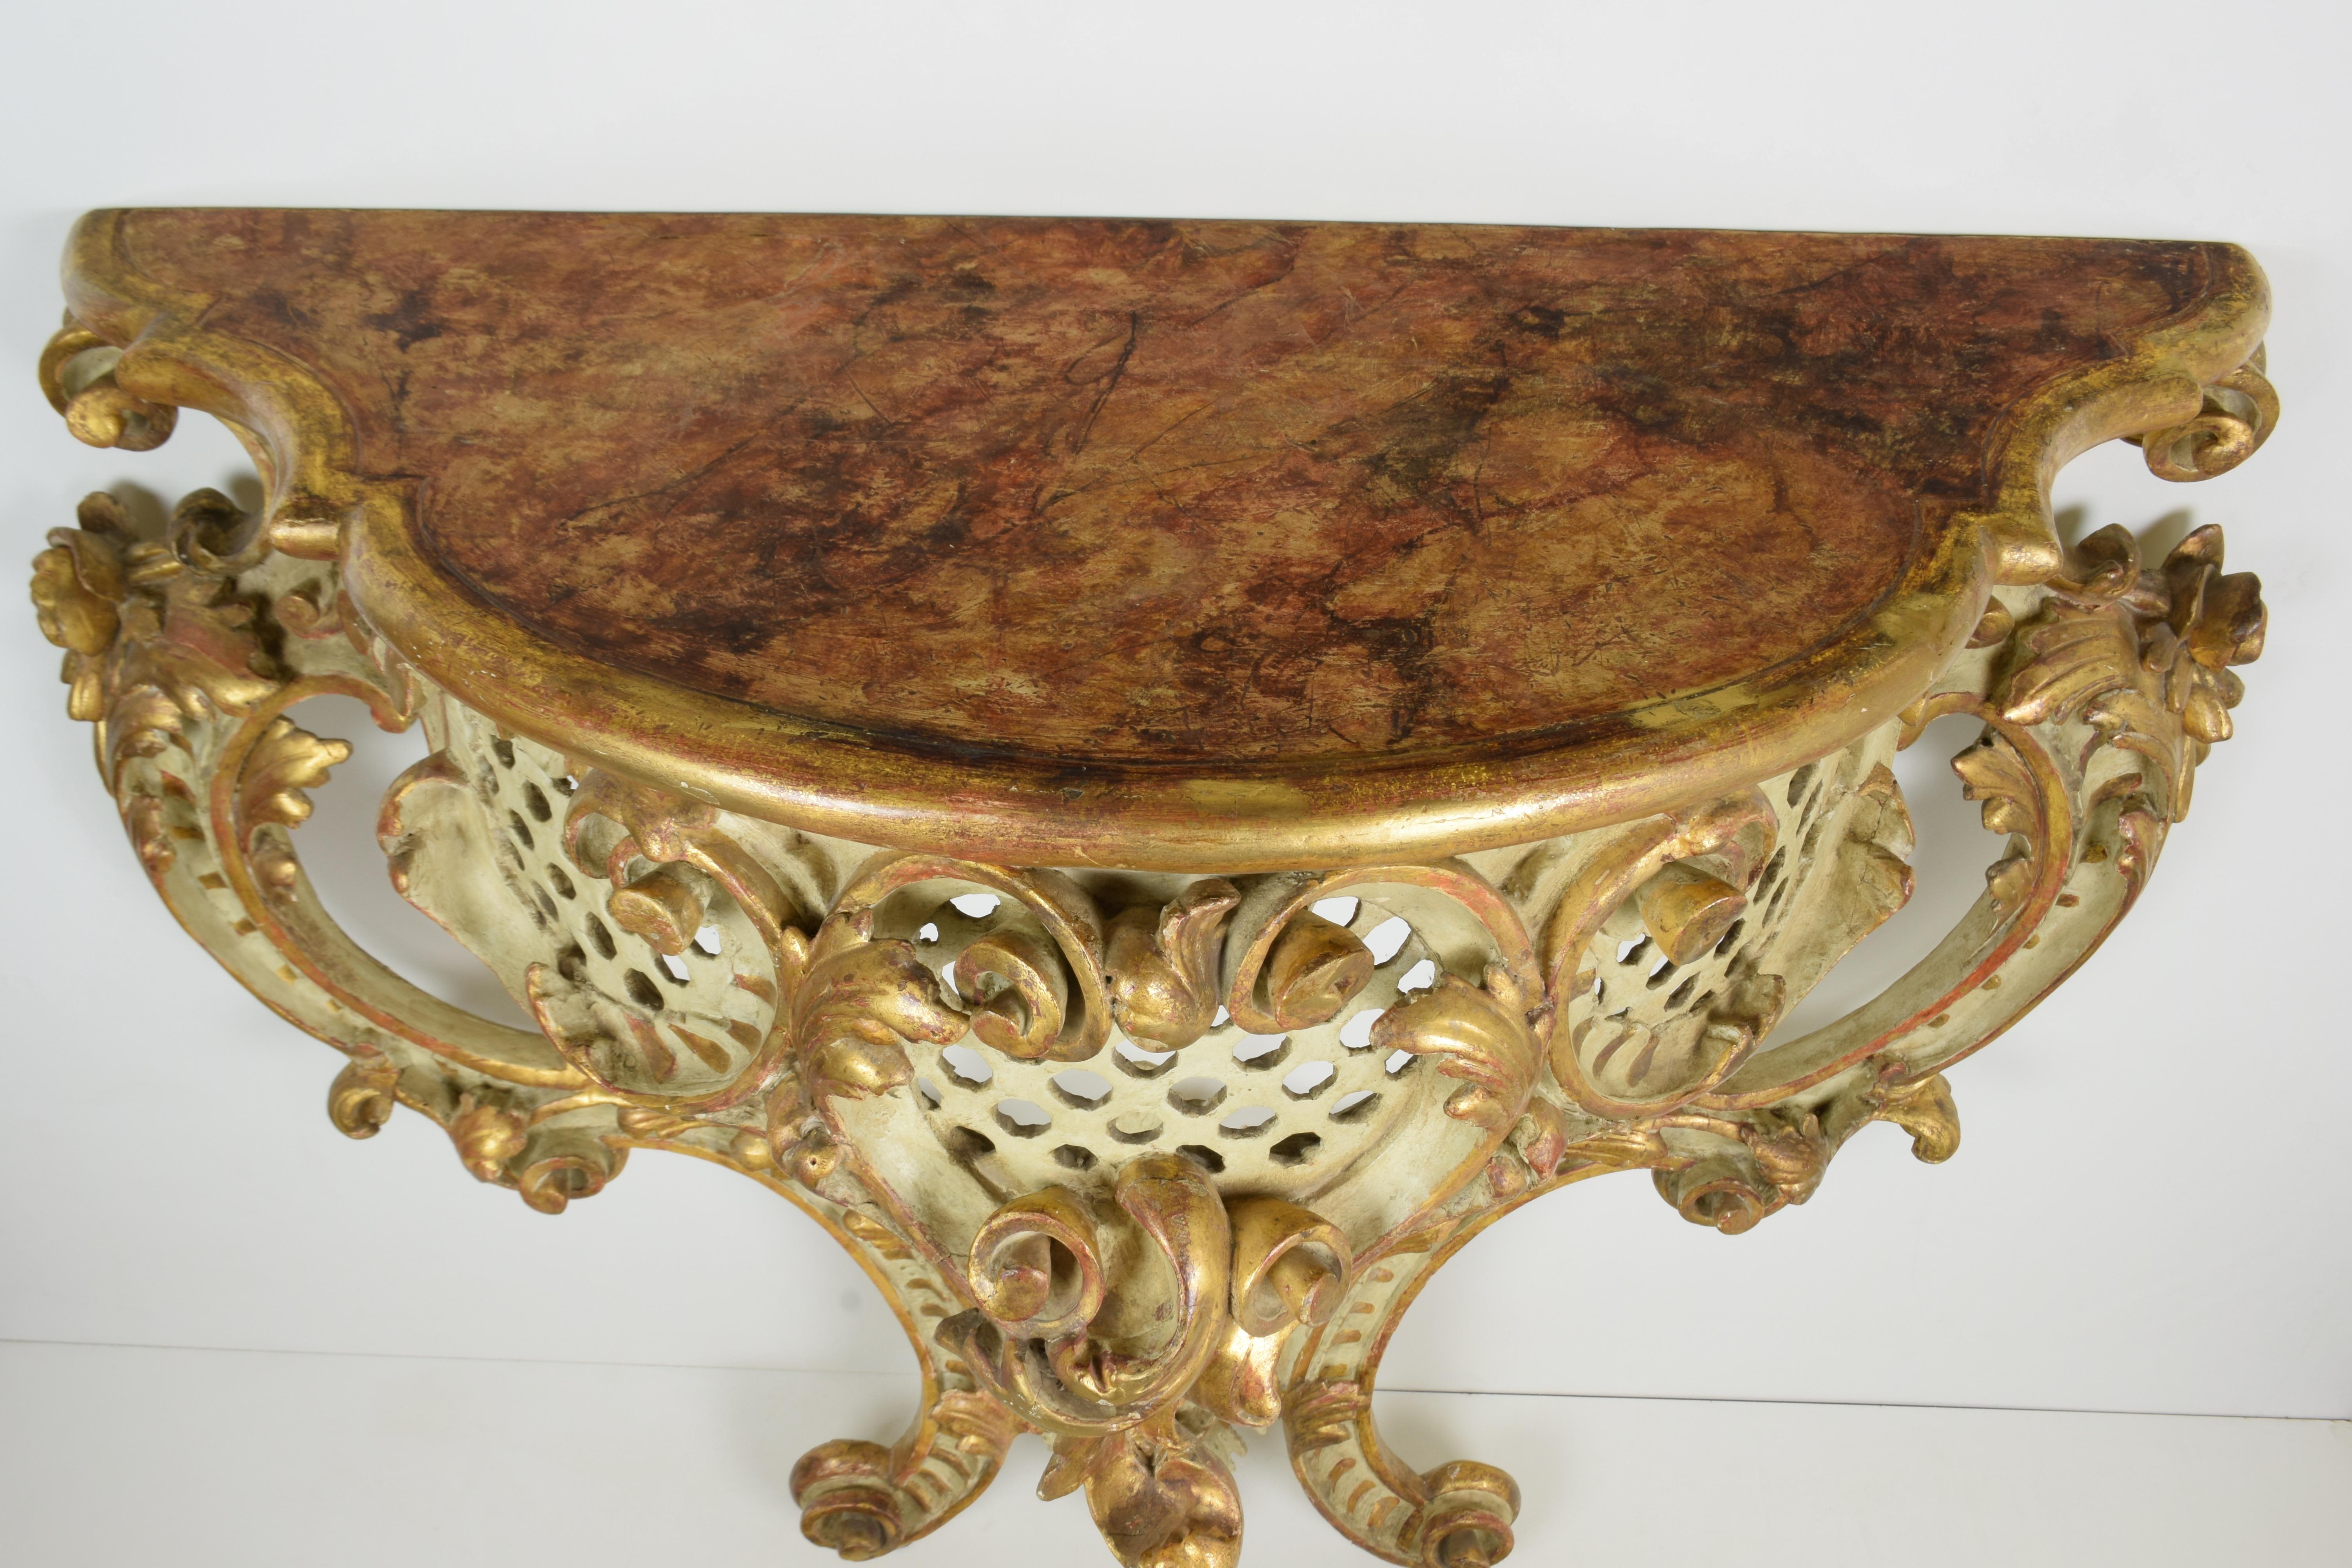 Lacquered and gilded pure gold
Faux marble top
Dimensions: cm W 110 x D 45 x H 101

Barocchetto Italiano (DAL 1720 AL 1780)
With the economic decline of the Italian aristocracy, the smaller proportions of Rococo furniture lent themselves to